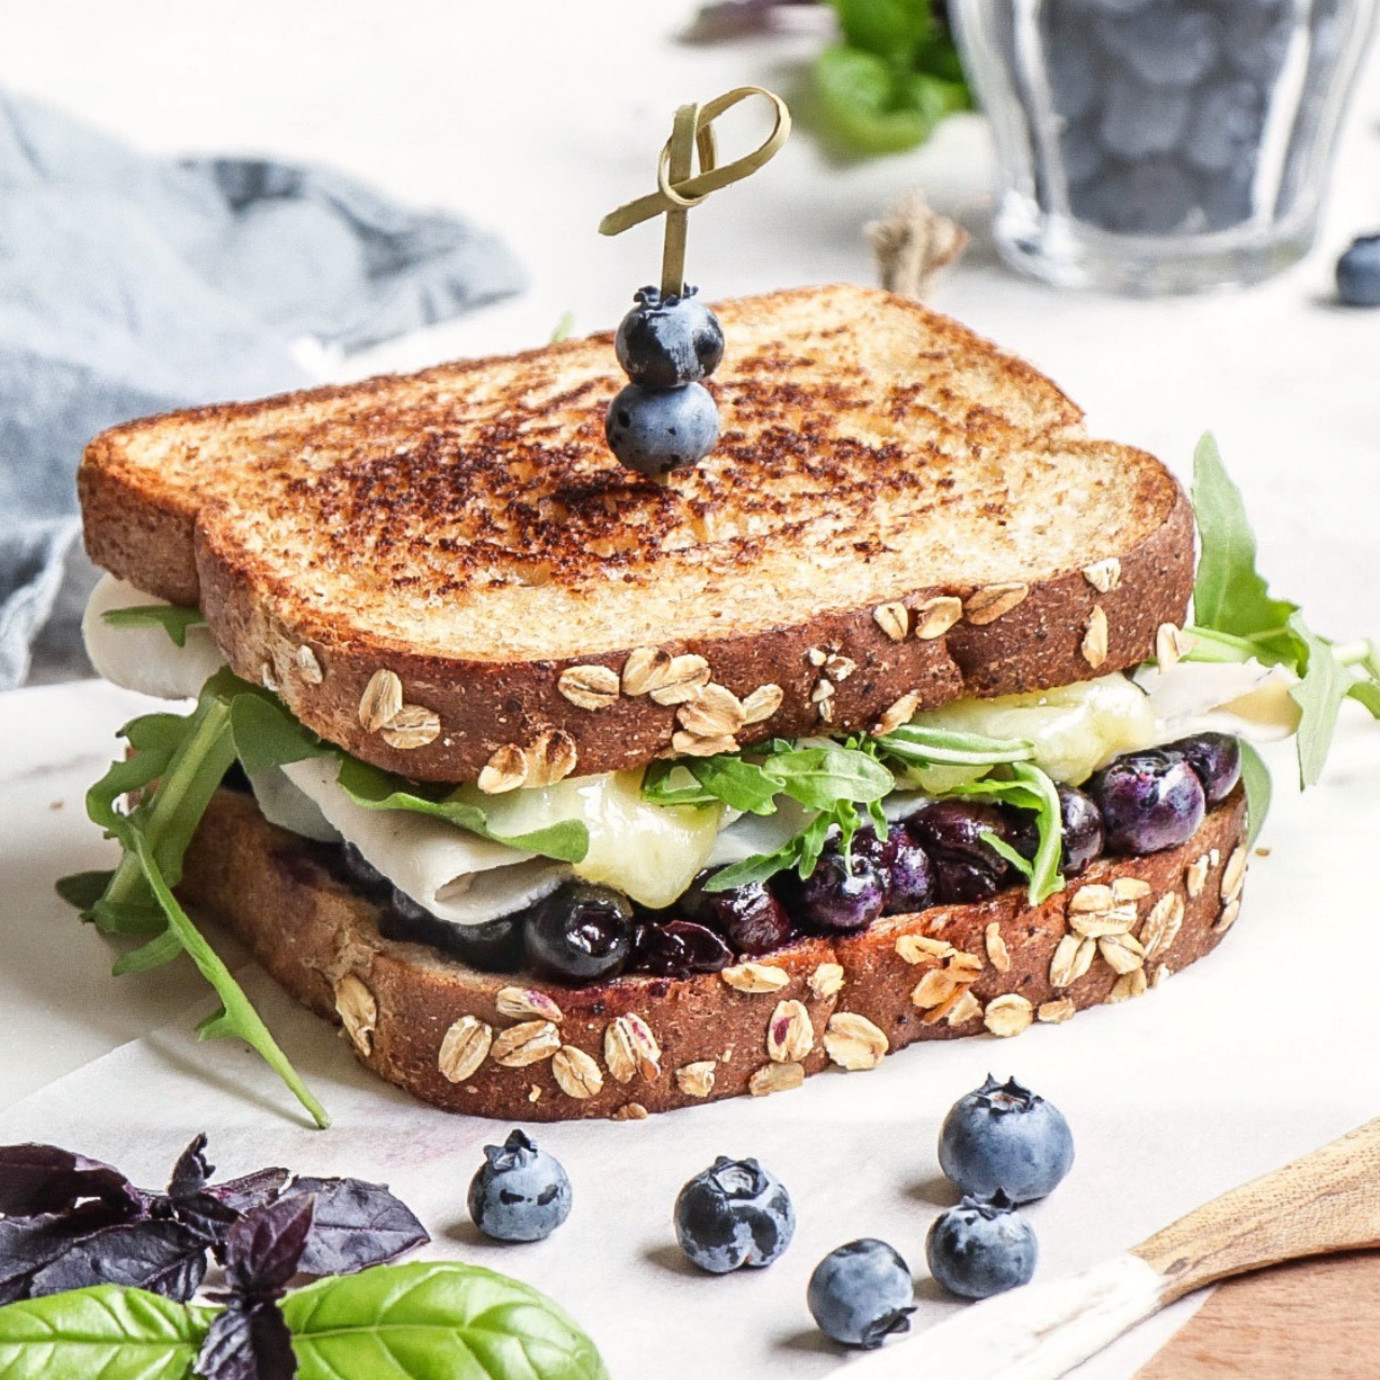 Grilled Cheese with Blueberries, Turkey and Cheddar